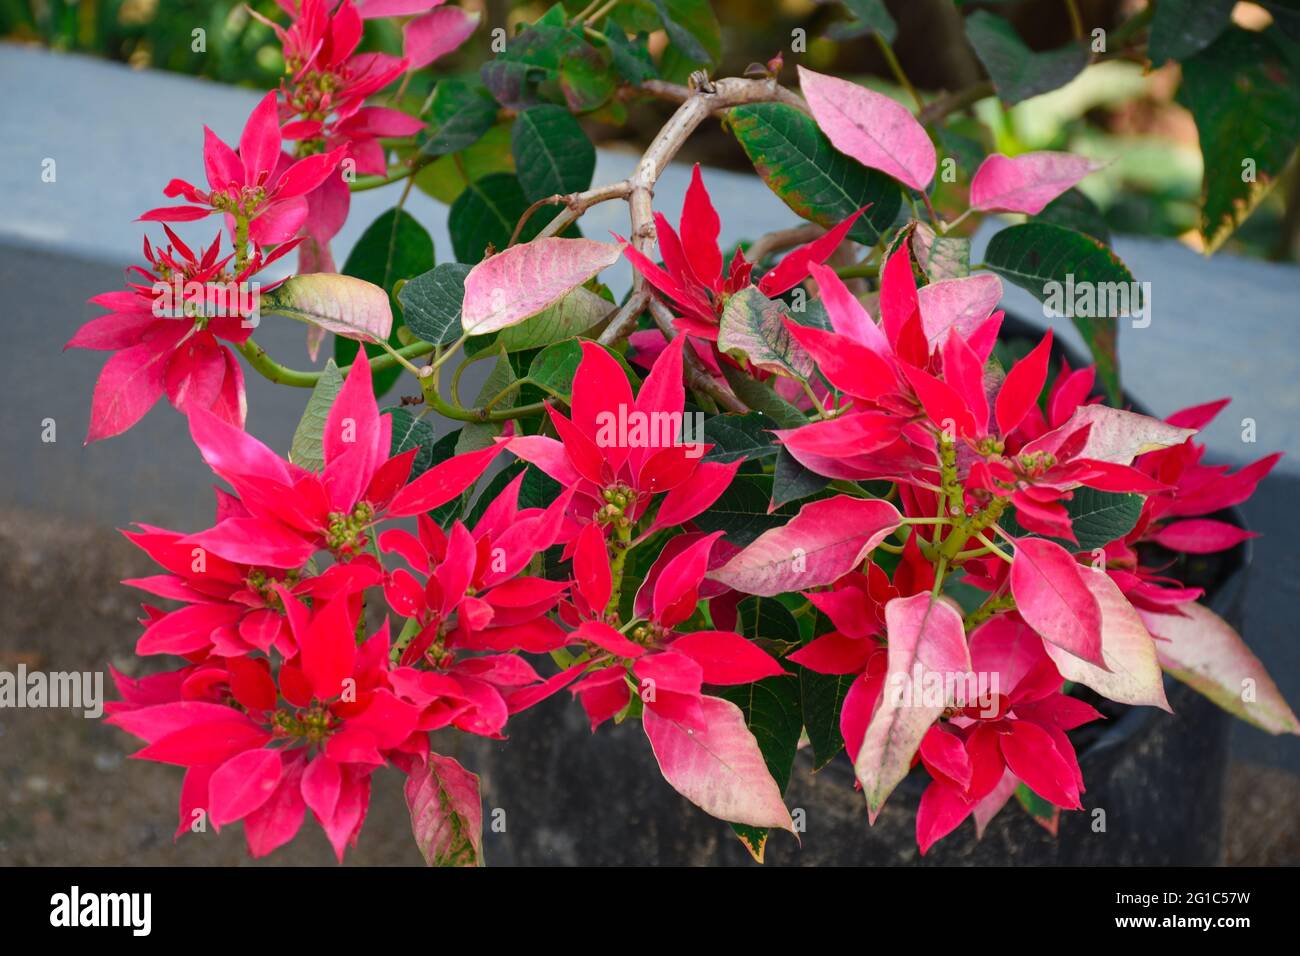 The poinsettia well known for its red and green foliage and is widely used in Christmas floral displays. Stock Photo